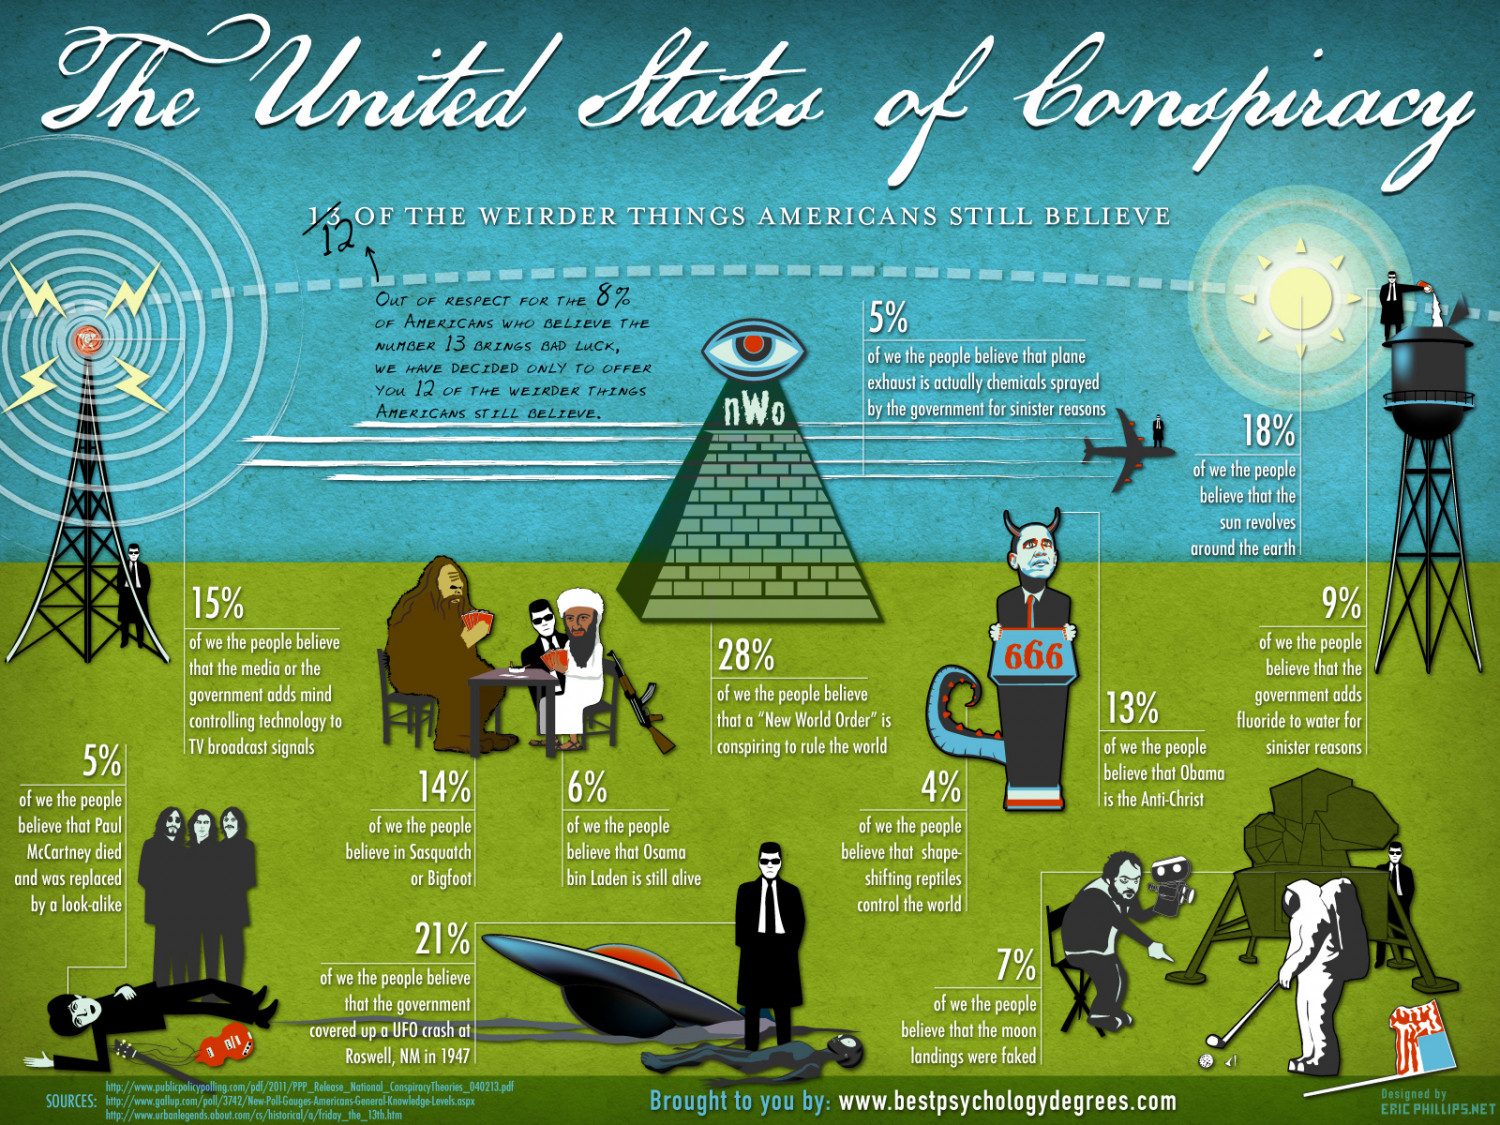 The United States of Conspiracy